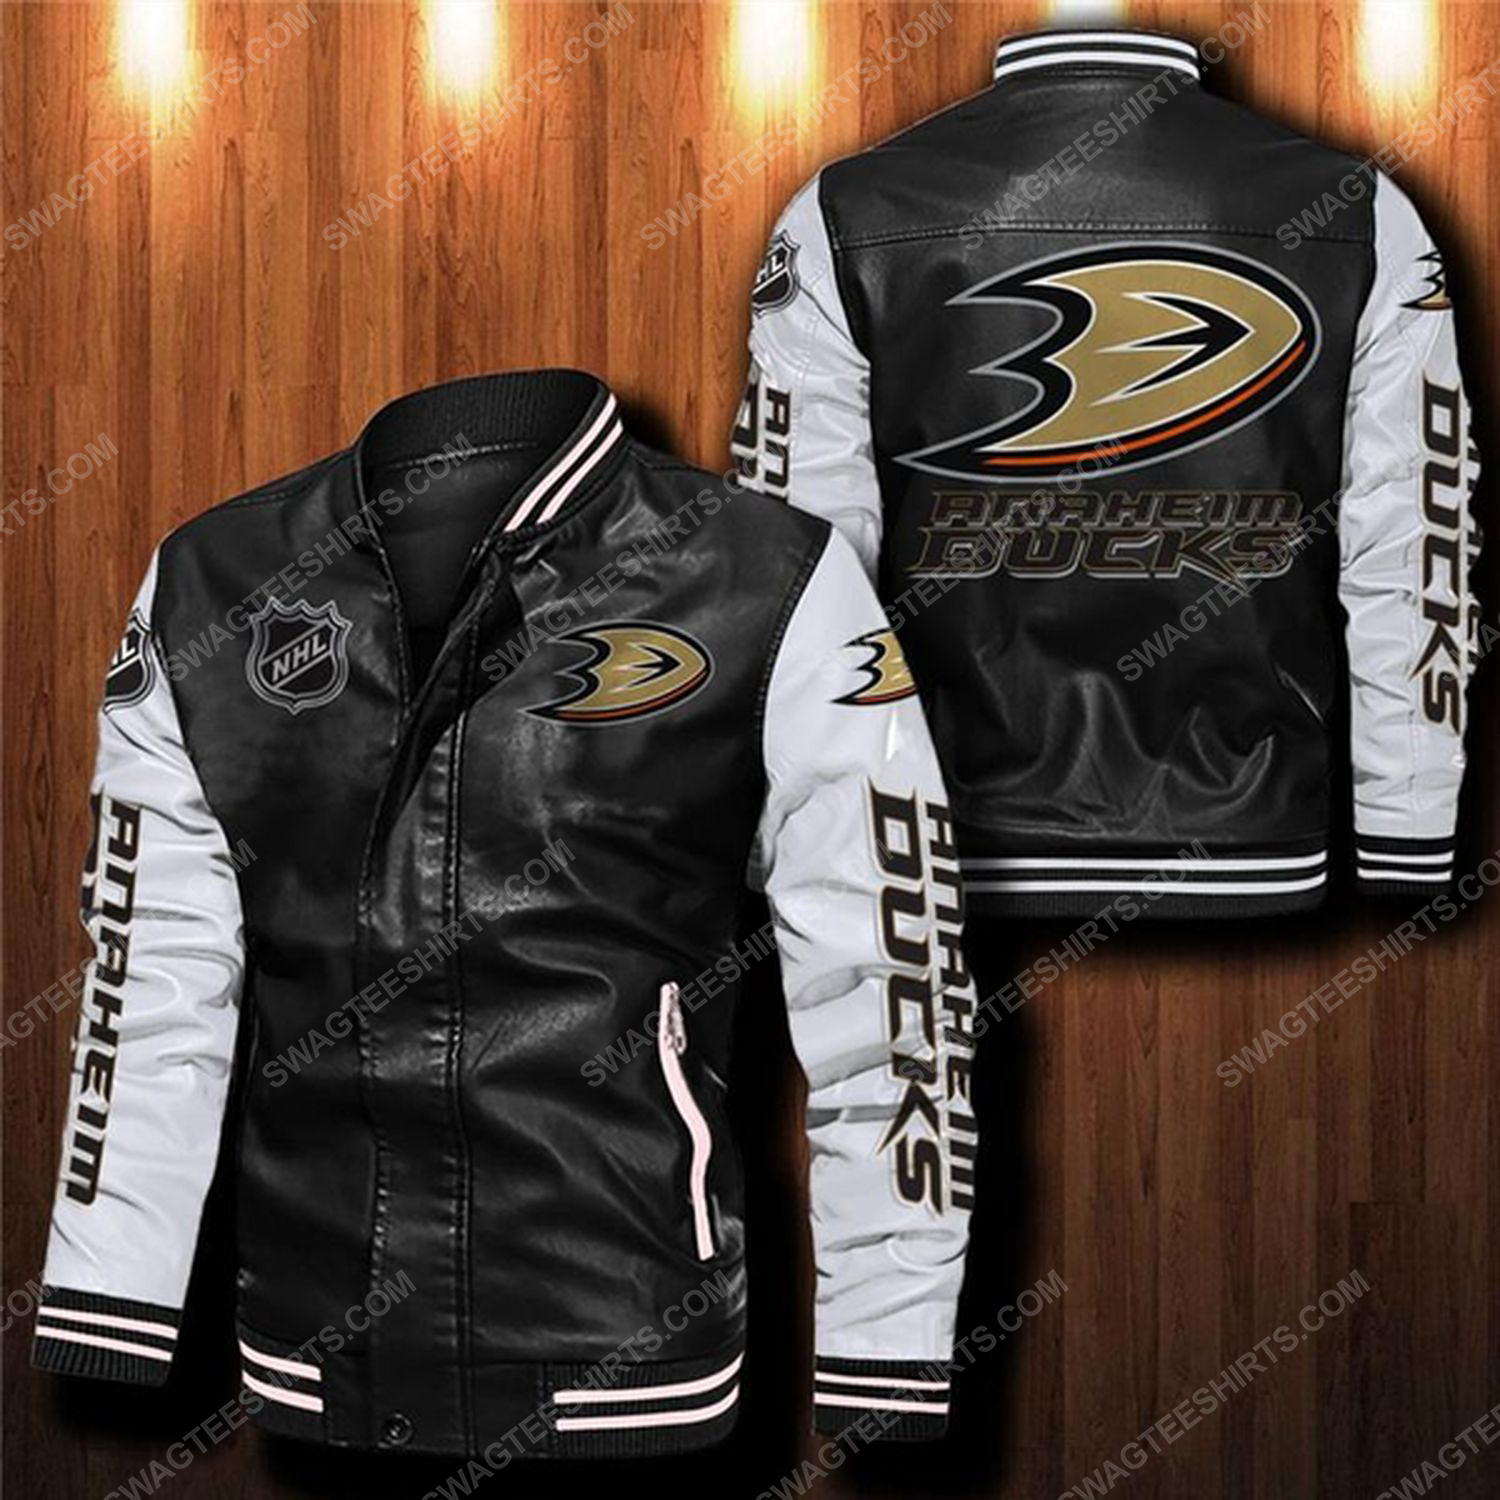 Anaheim ducks all over print leather bomber jacket - white